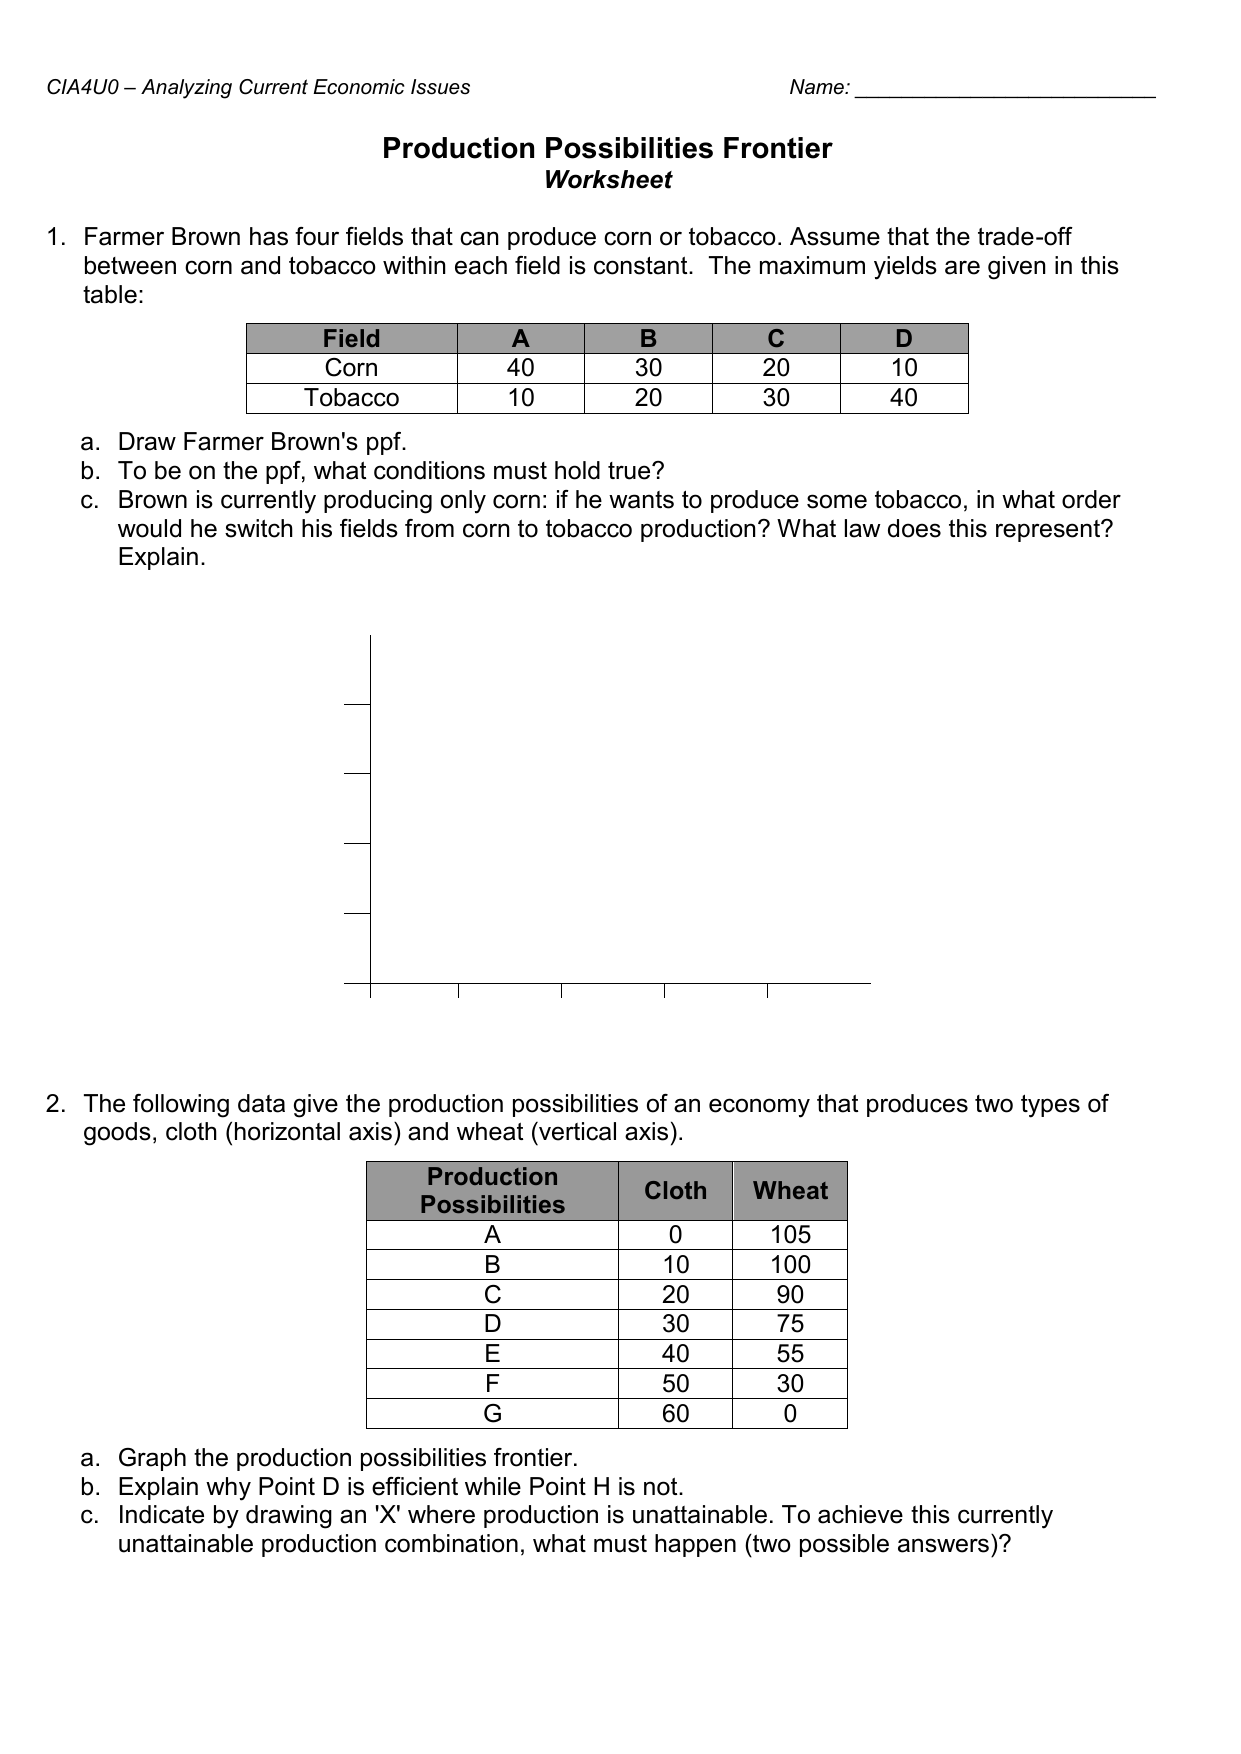 PPF Worksheet Within Production Possibilities Frontier Worksheet